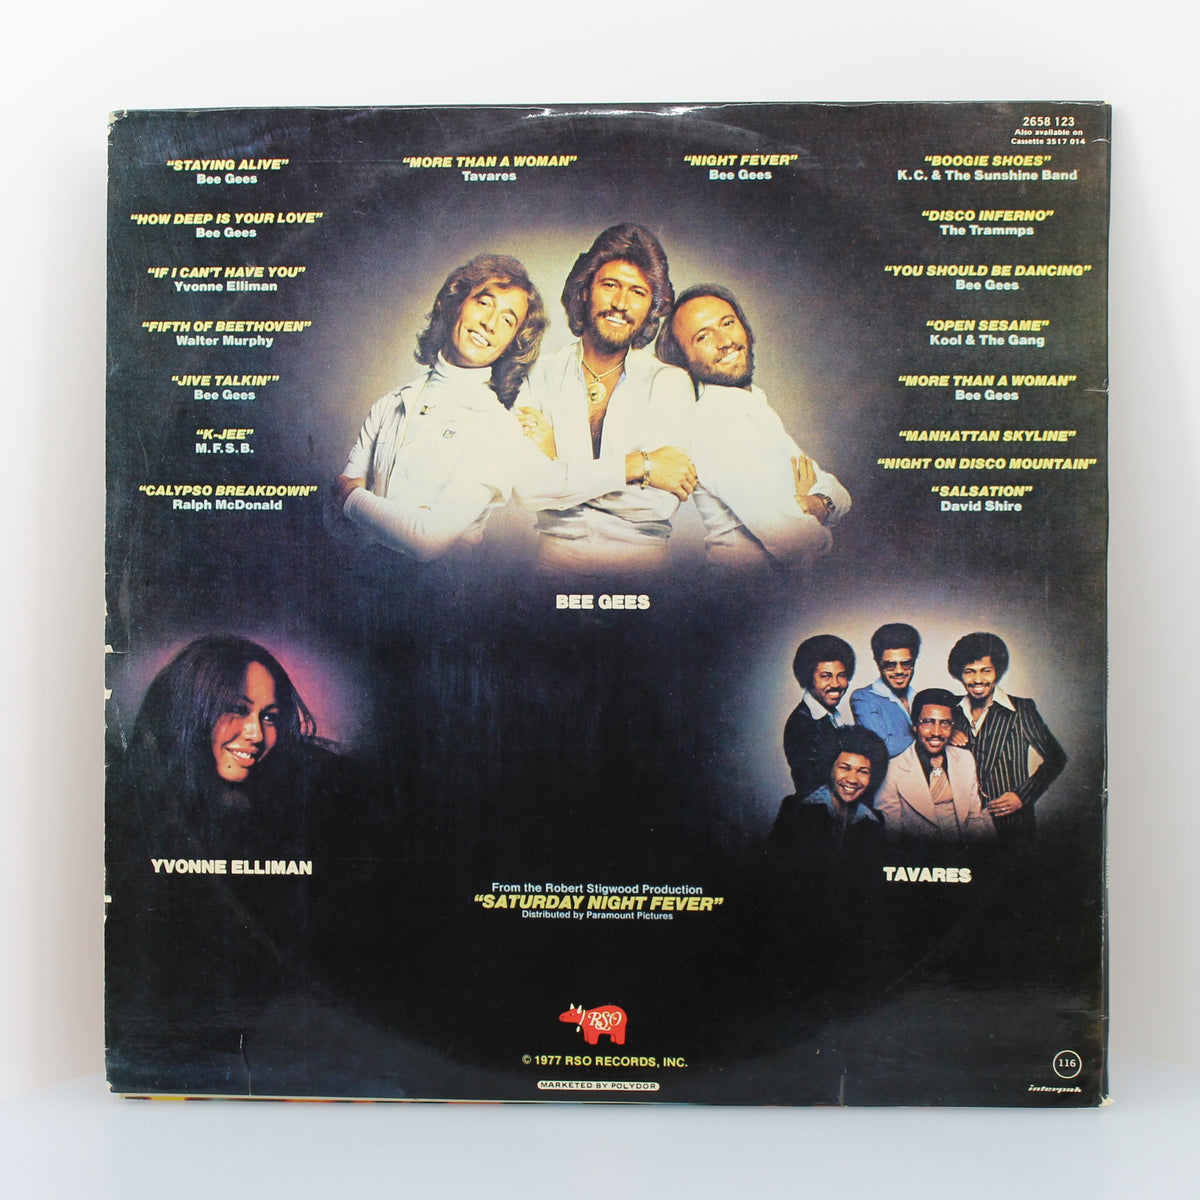 Bee Gees - Saturday Night Fever, Vinyl LP 33Rpm, South Africa